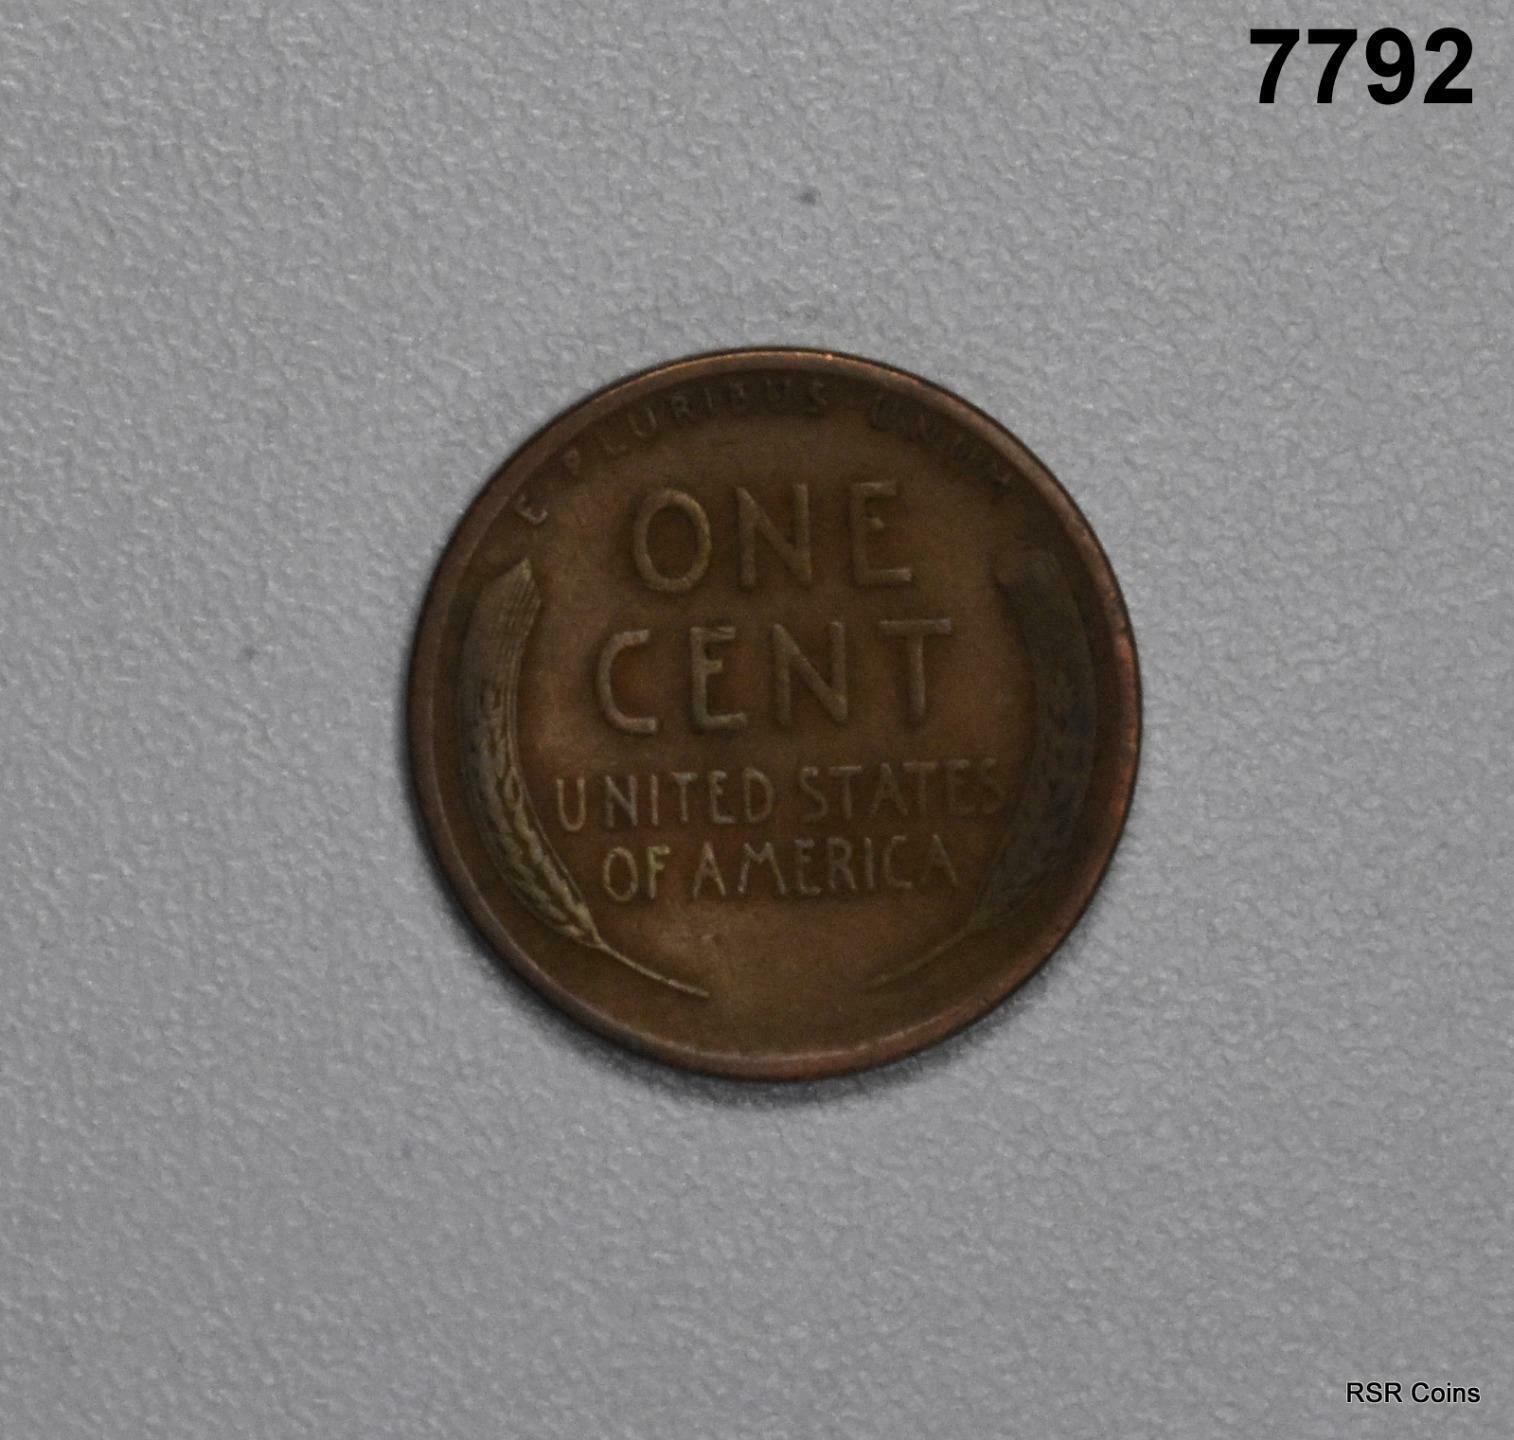 1911 D LINCOLN CENT VF #7792